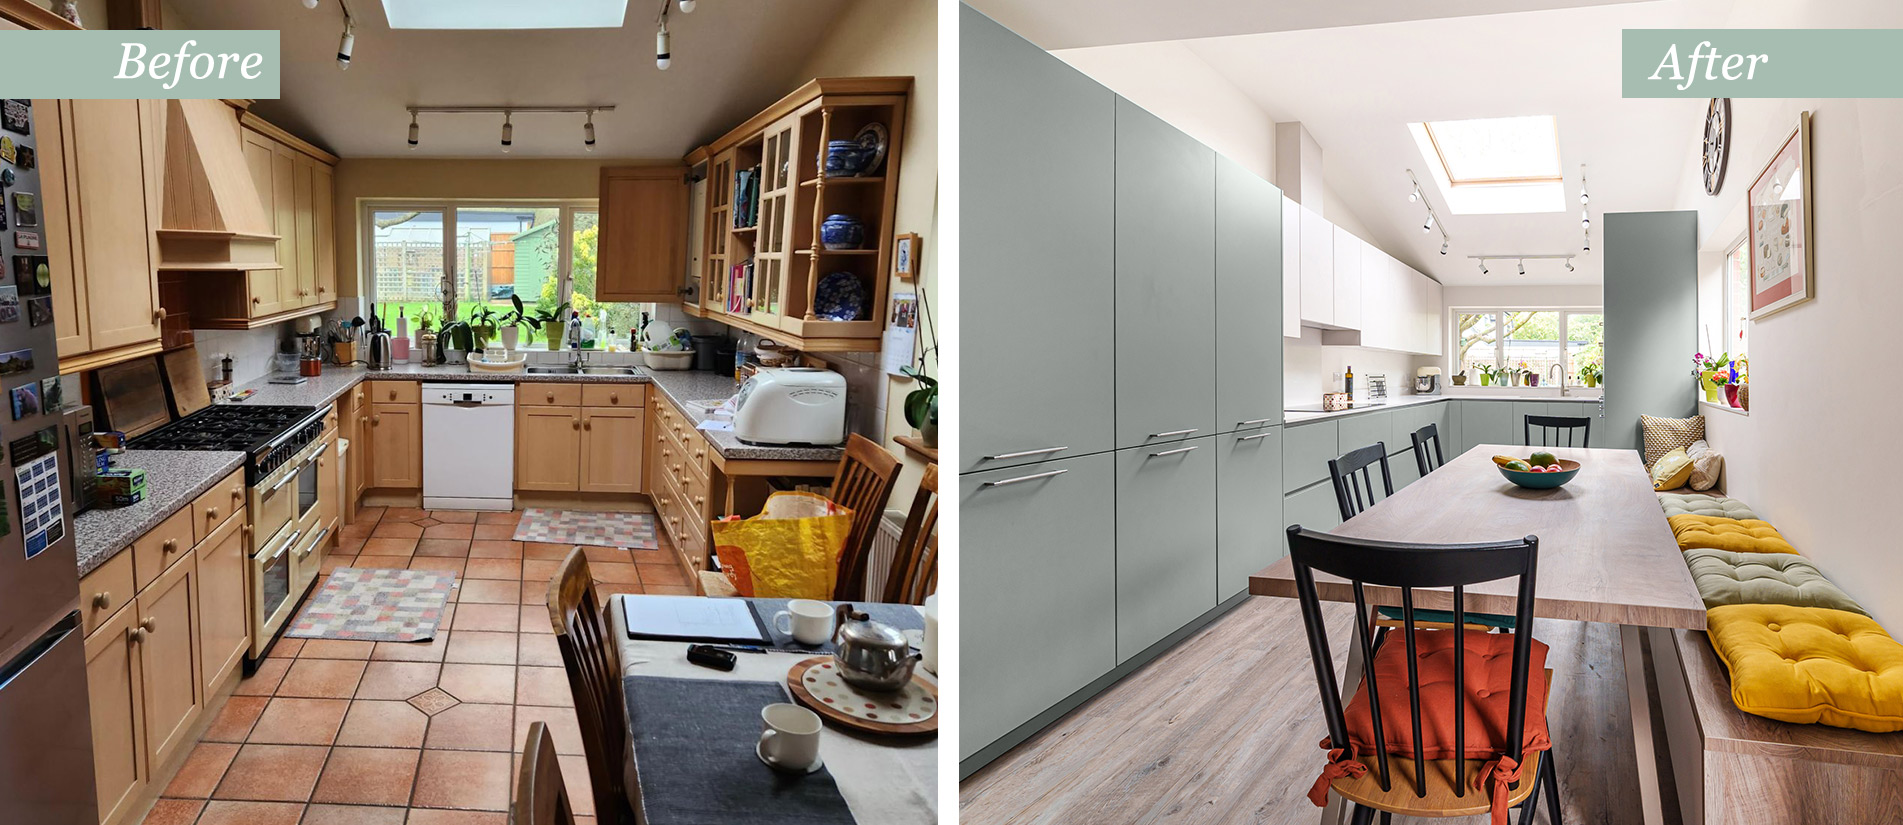 u-shaped kitchen before and after renovation